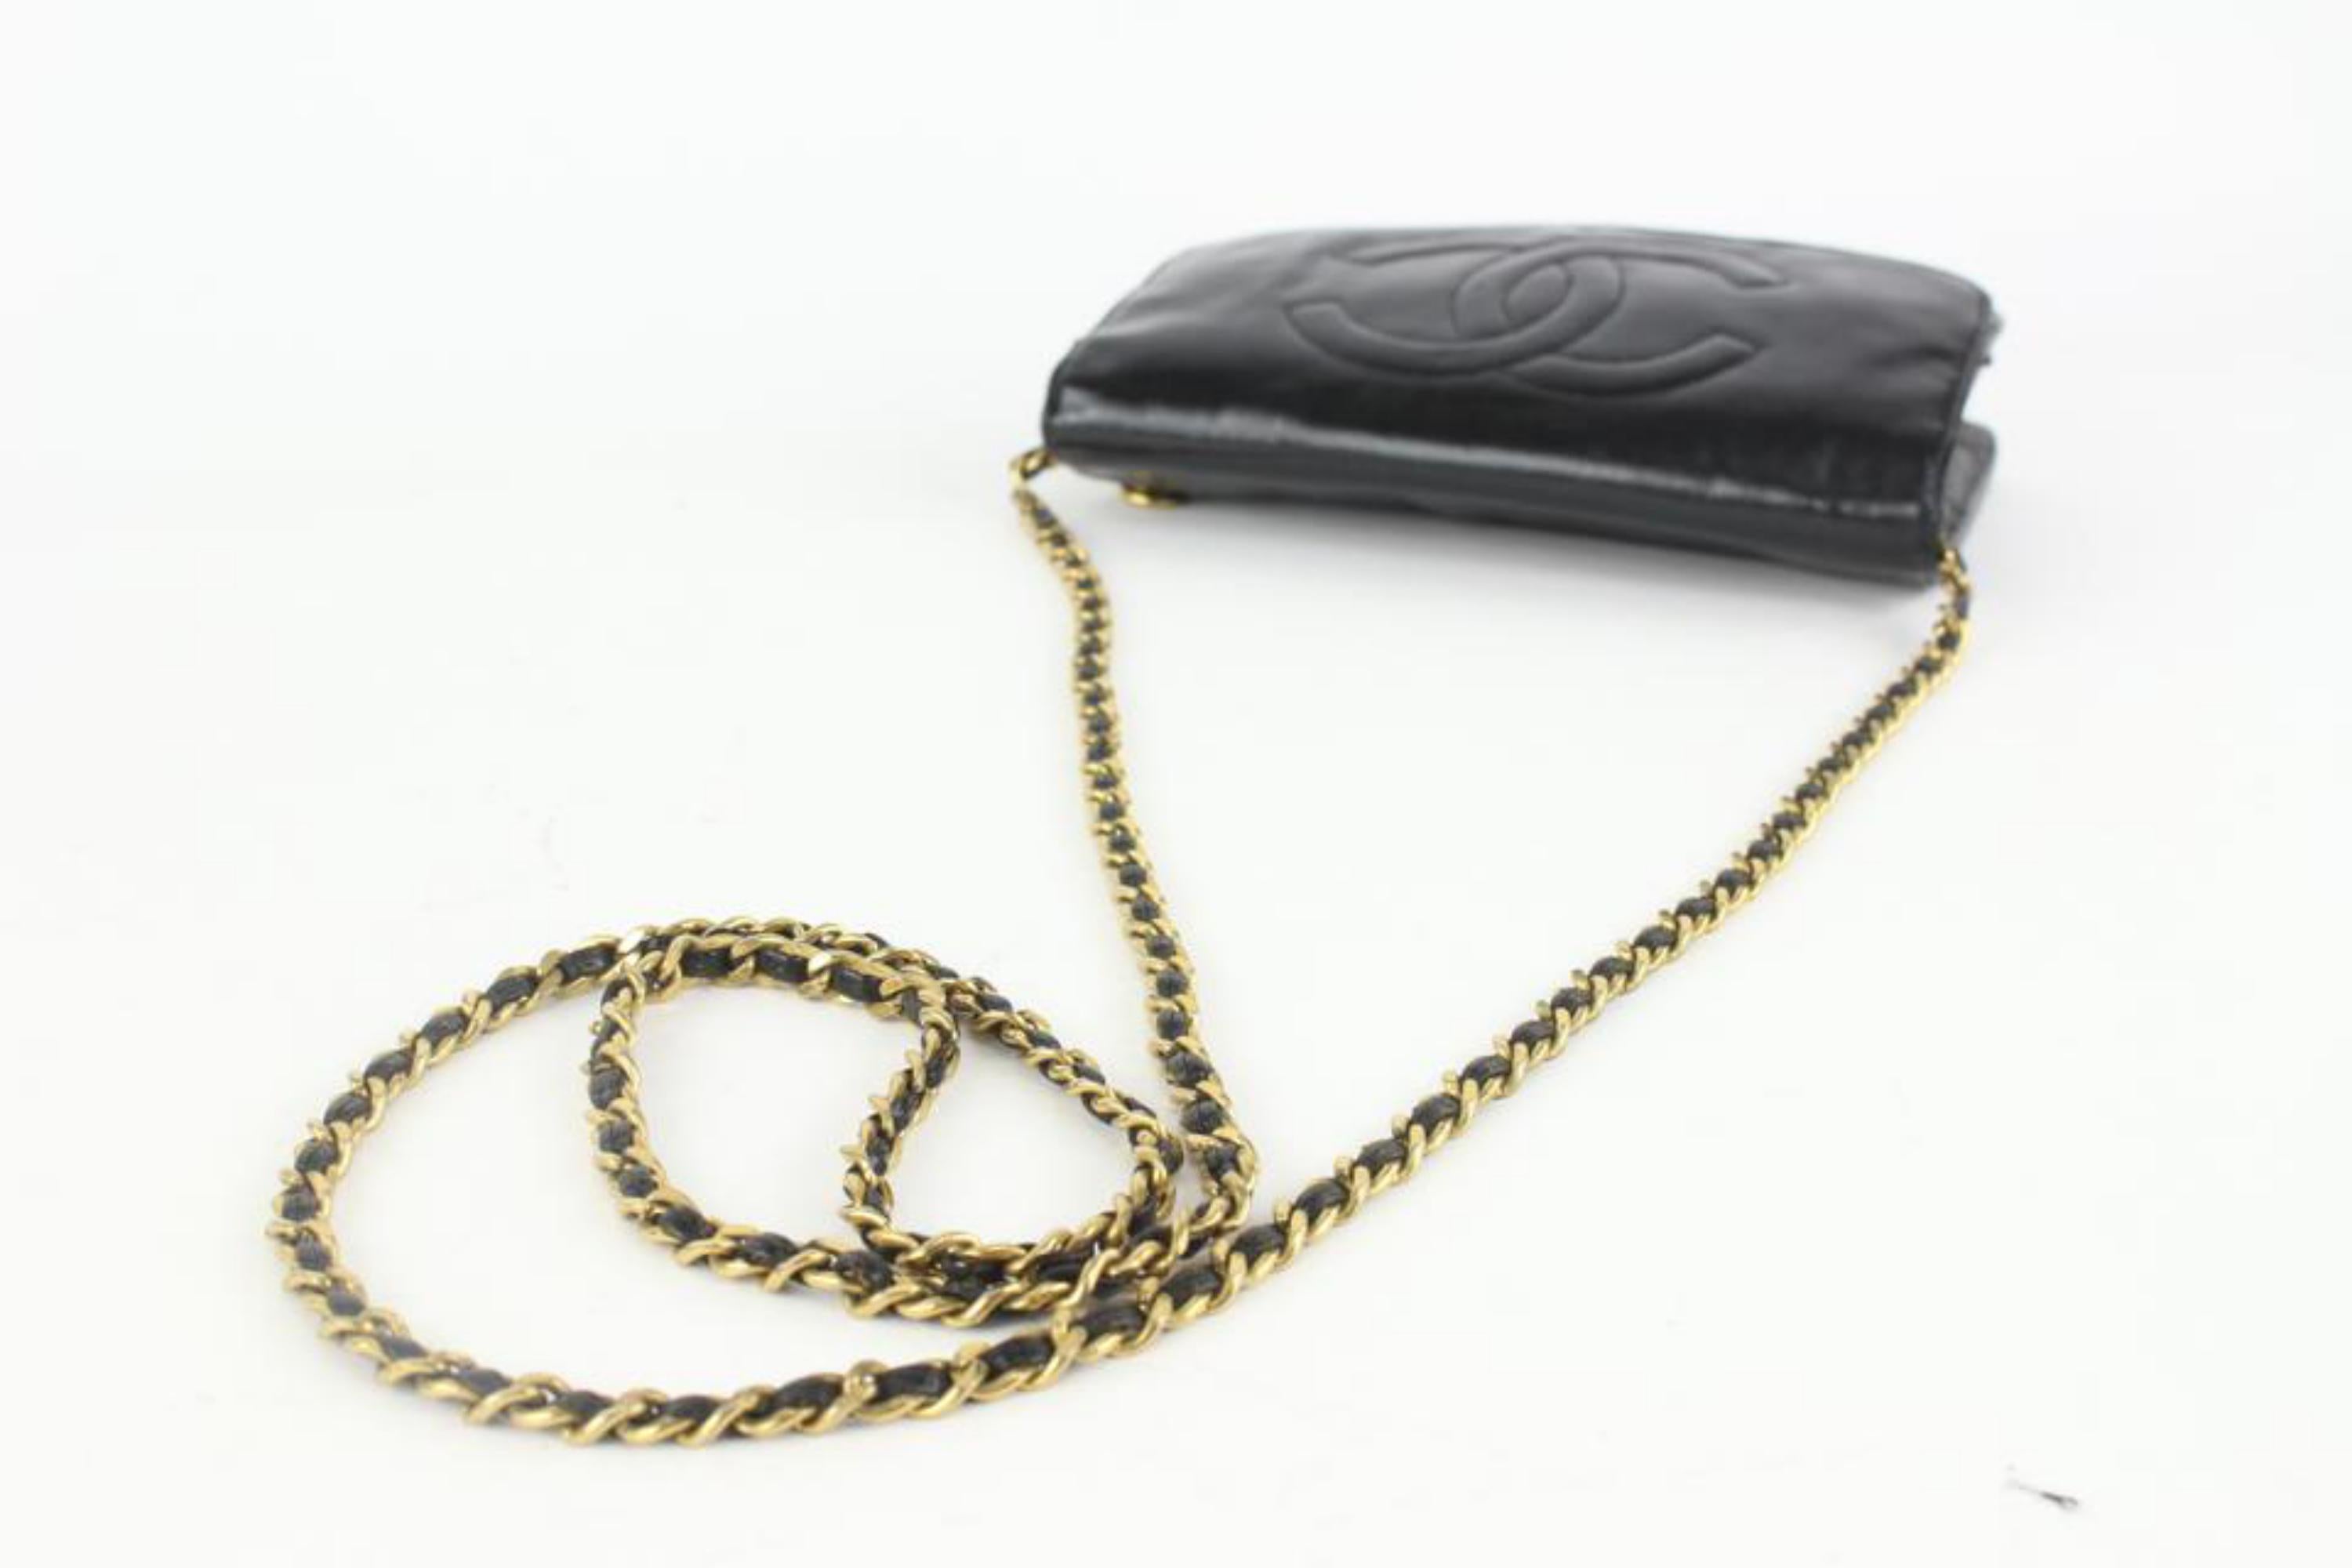 Chanel Vintage Black Patent Leather Timeless Wallet on Chain WOC Flap 1112c59 For Sale 4